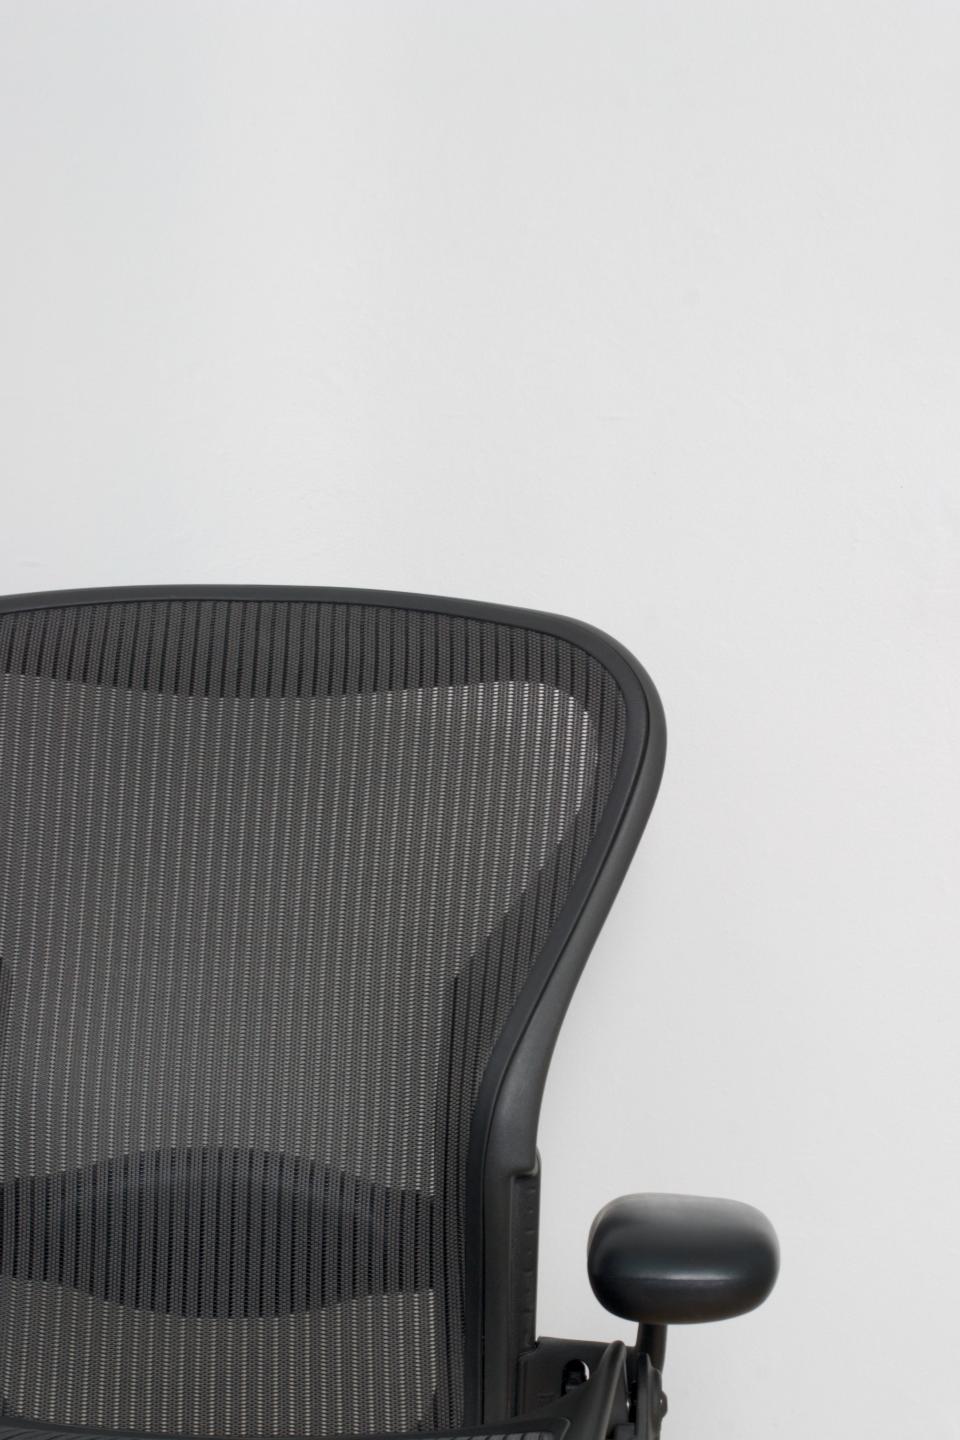 The famous Aeron office chair.